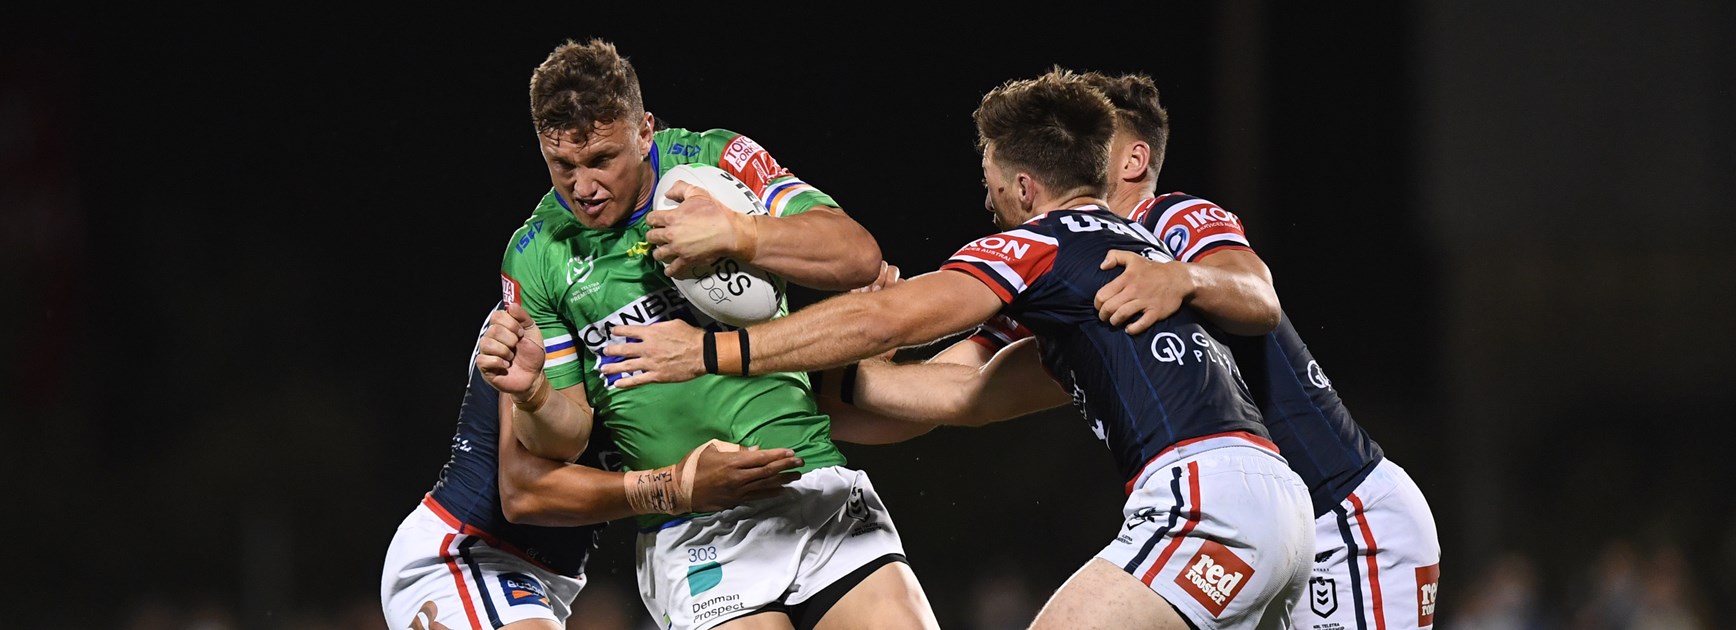 Raiders bow out after loss to Roosters